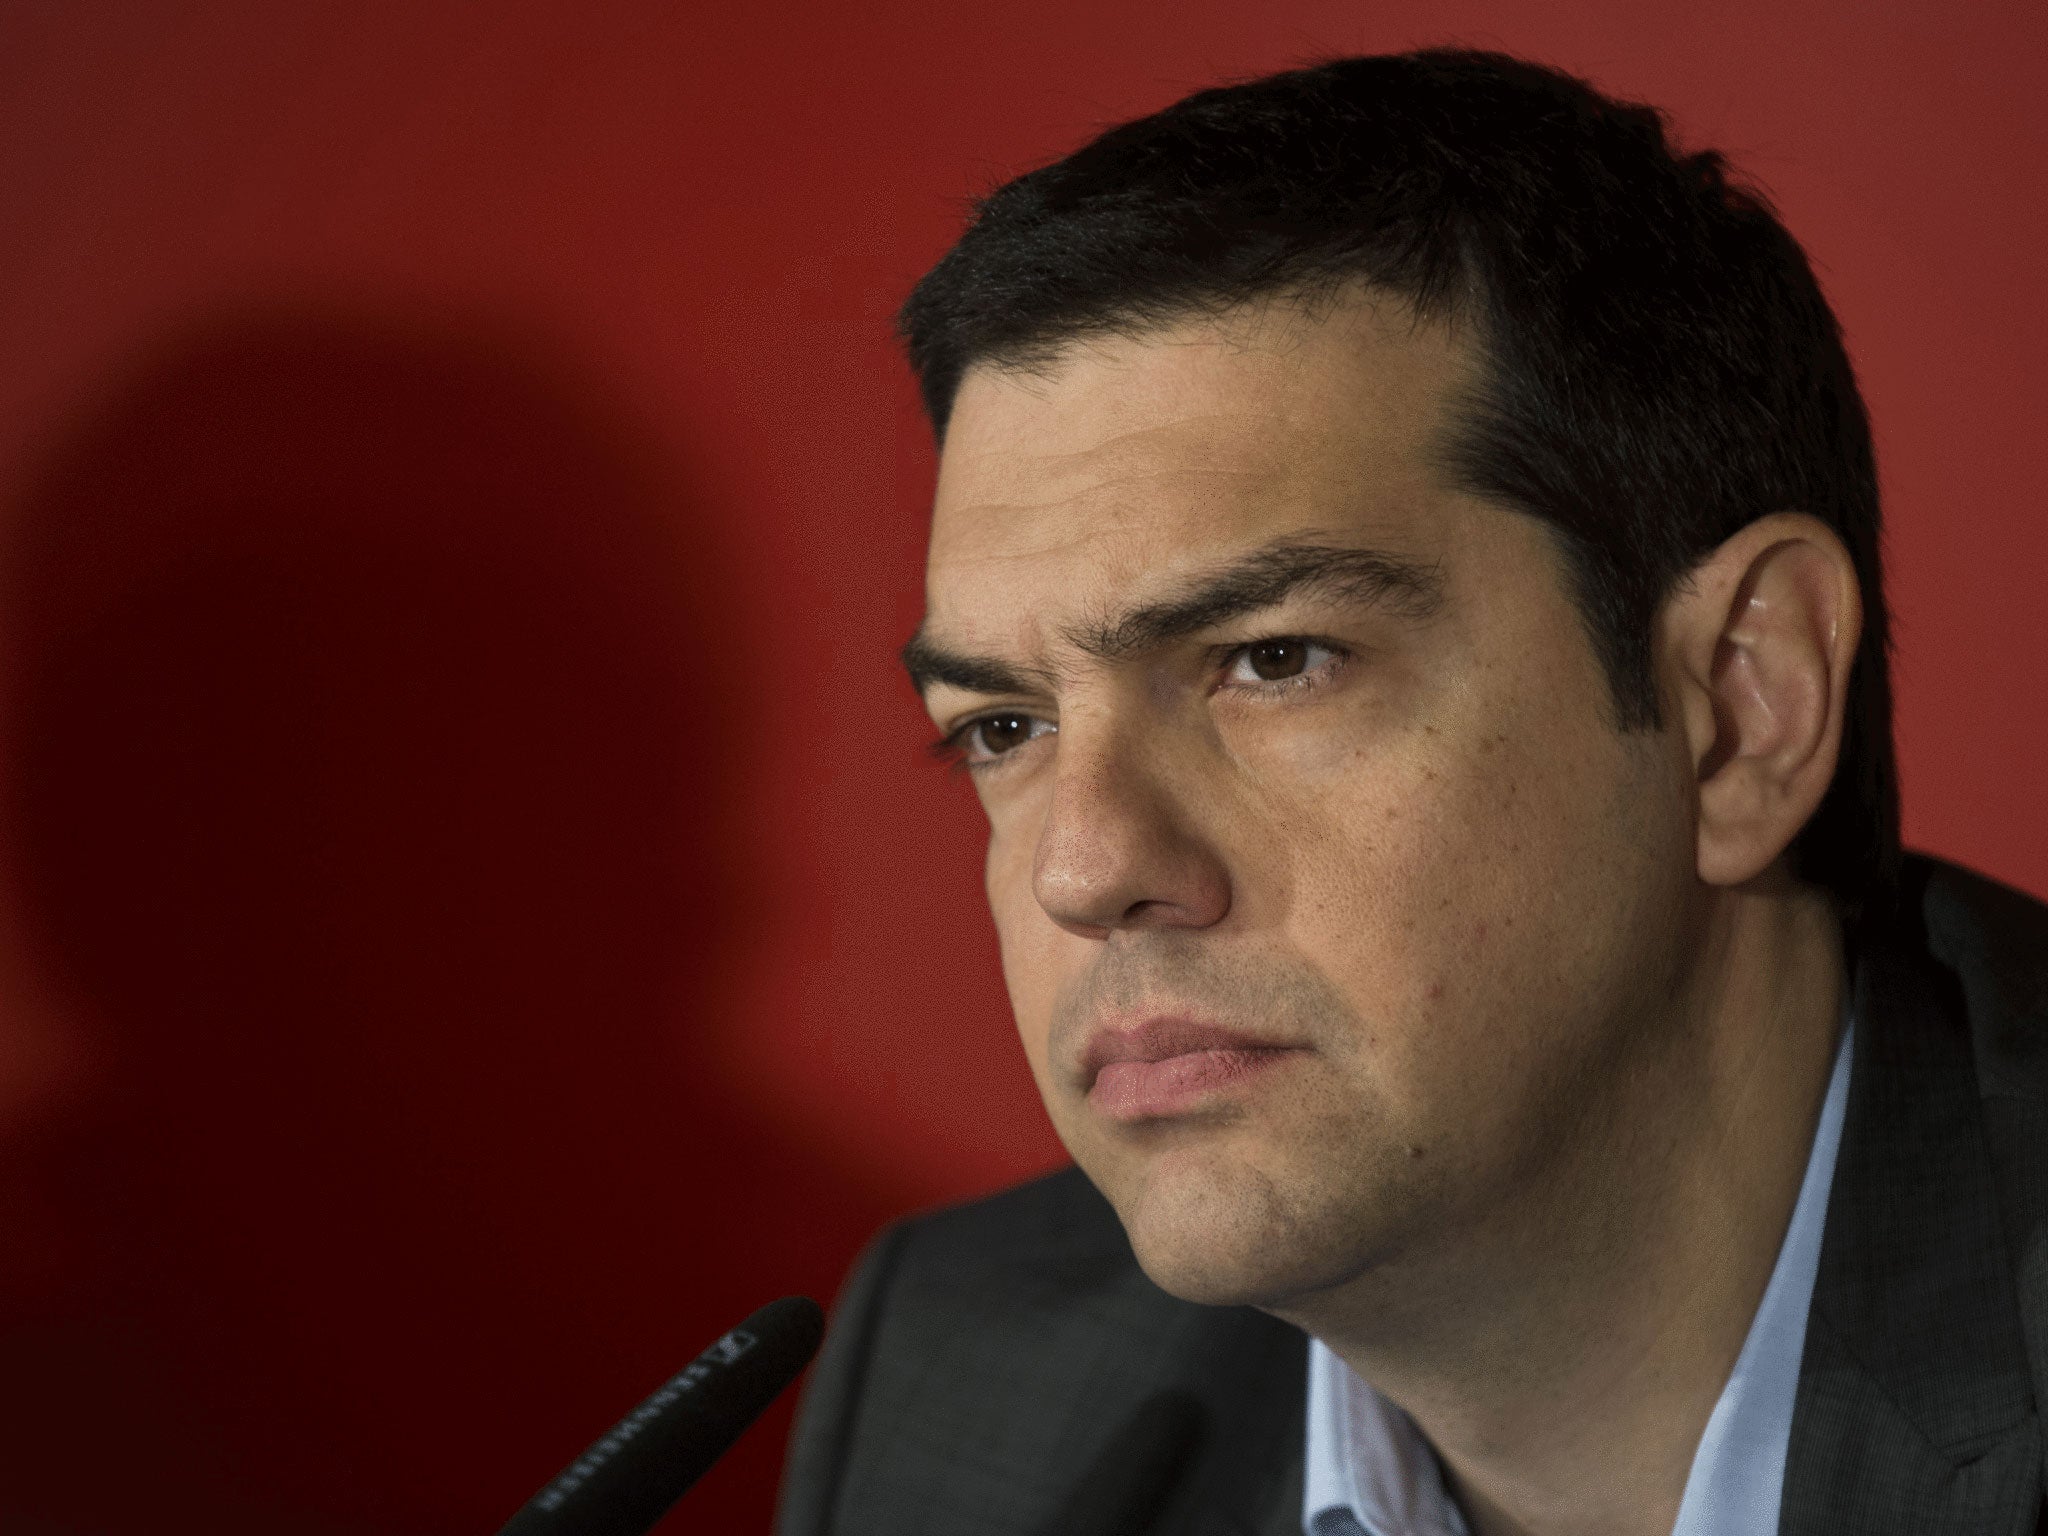 ‘Ithaca will once again be identified with the end of a modern day Odyssey,’ said the Greek prime minster during his speech from the home of Odysseus